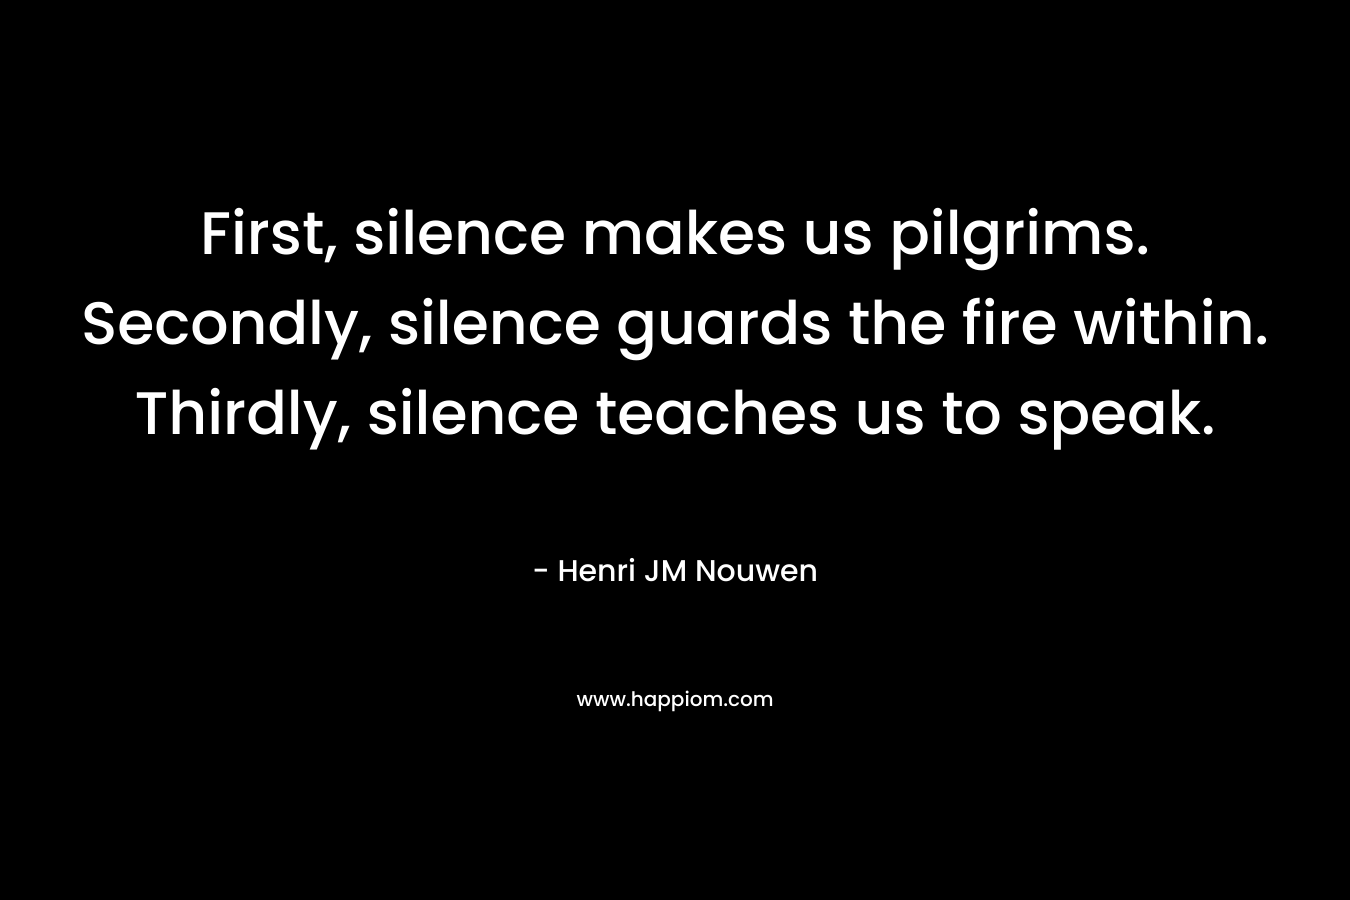 First, silence makes us pilgrims. Secondly, silence guards the fire within. Thirdly, silence teaches us to speak.